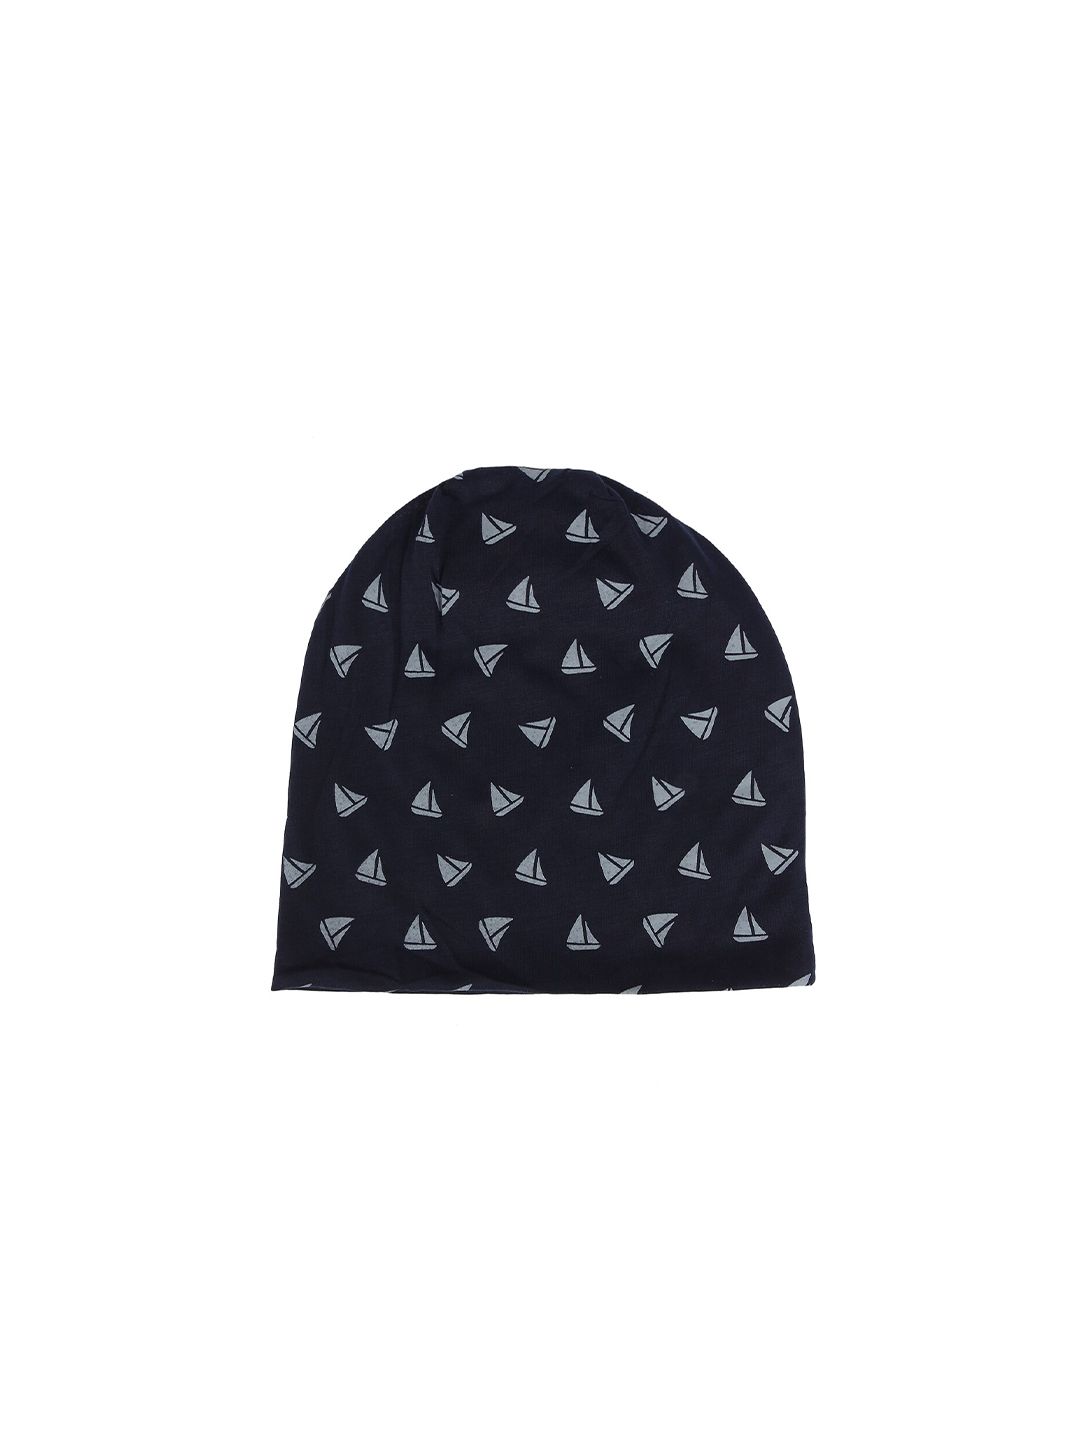 iSWEVEN Unisex Blue & Grey Printed Beanie Price in India